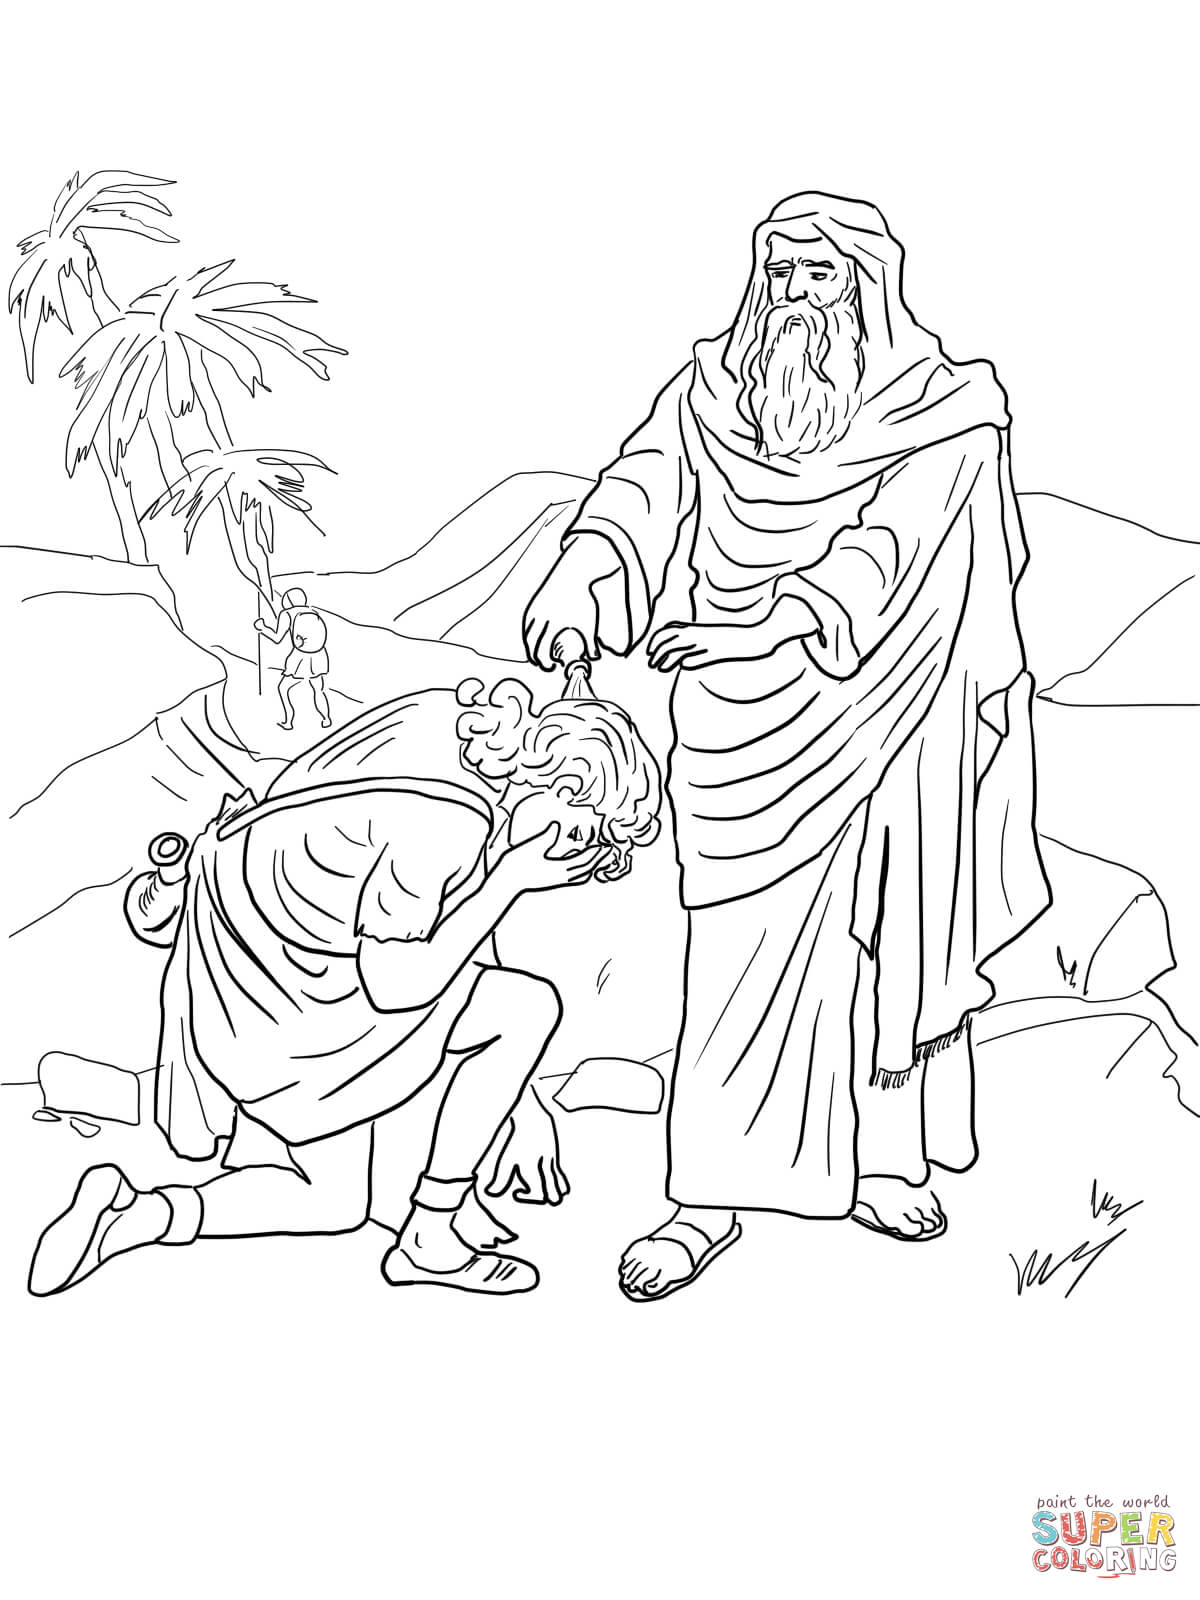 Samuel anoints david as king coloring page free printable coloring pages